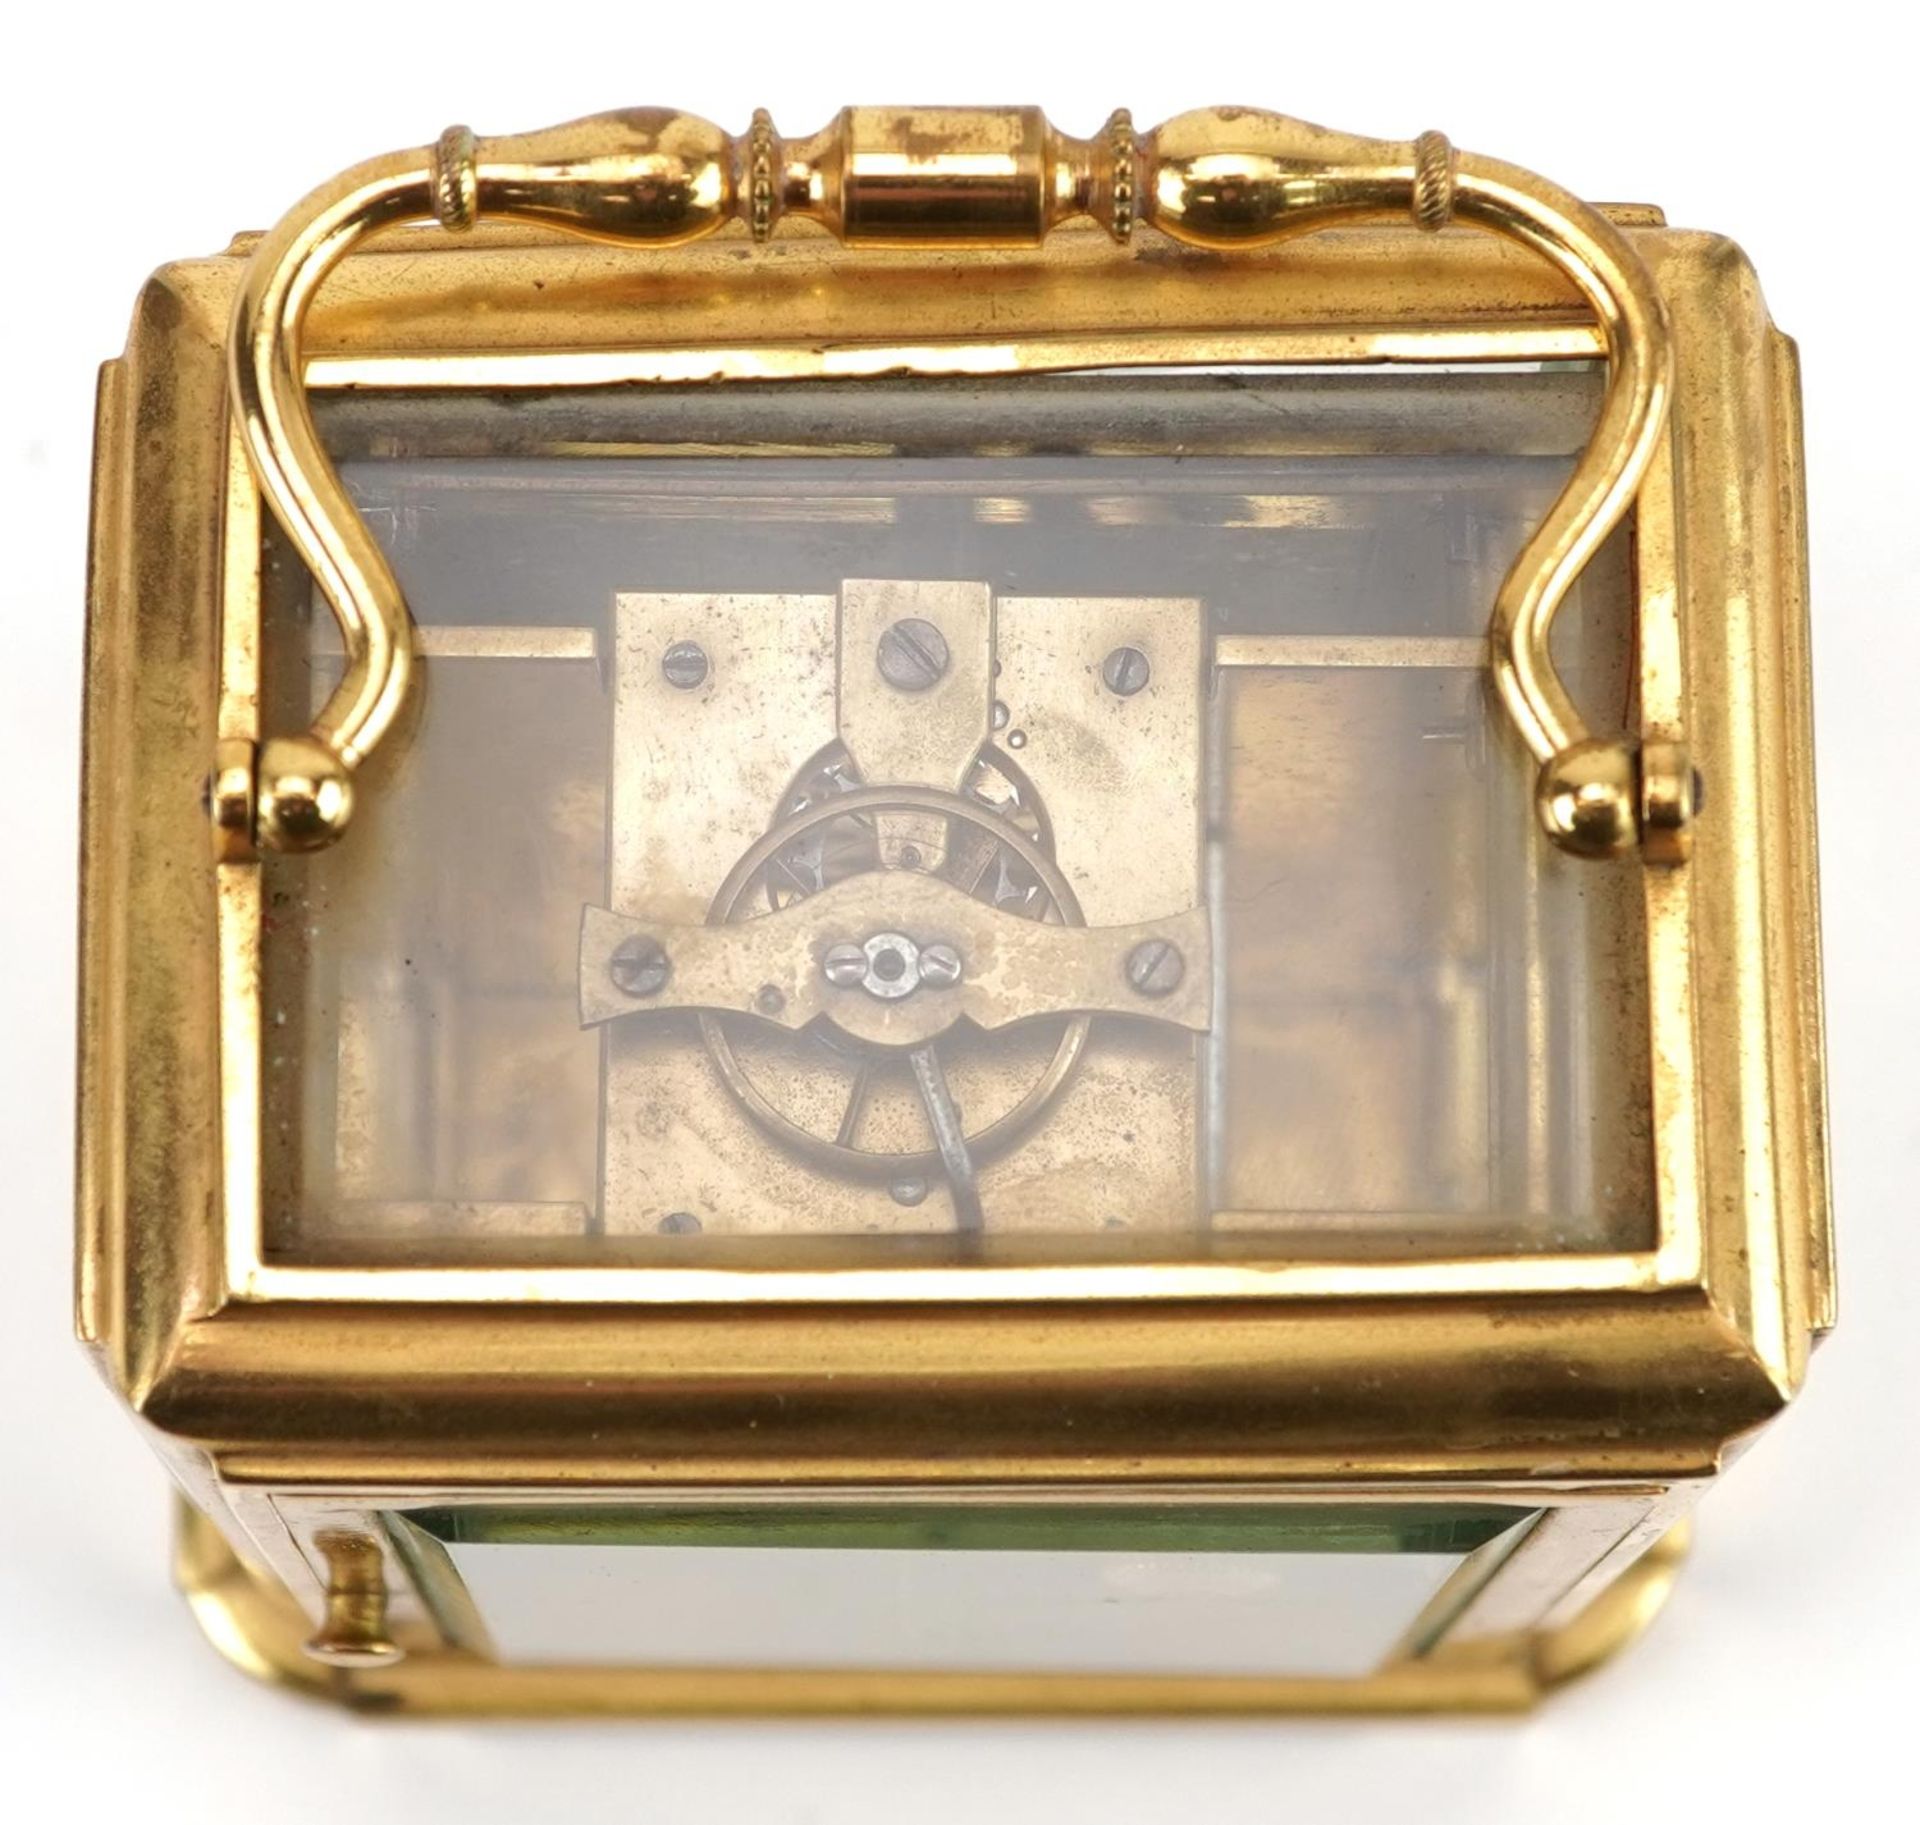 Henri Marc of Paris, 19th century French gilt brass carriage clock having enamelled dial with - Image 4 of 5